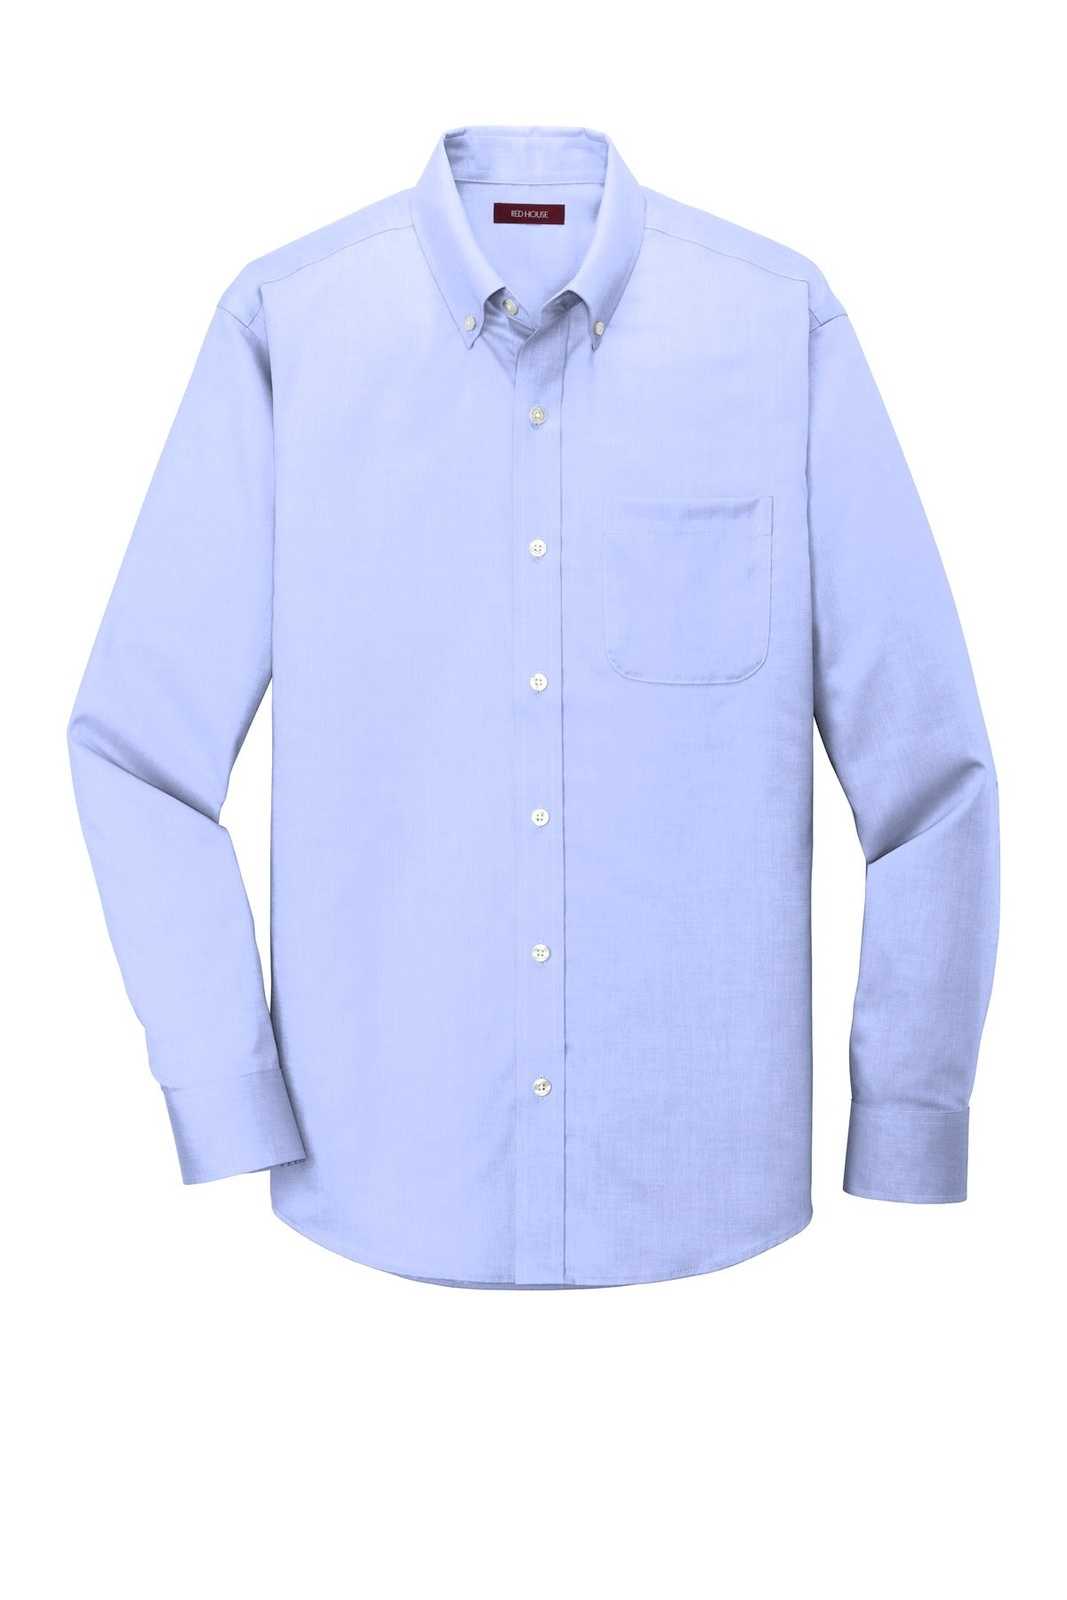 Red House RH240 Pinpoint Oxford Non-Iron Shirt - Blue - HIT a Double - 5